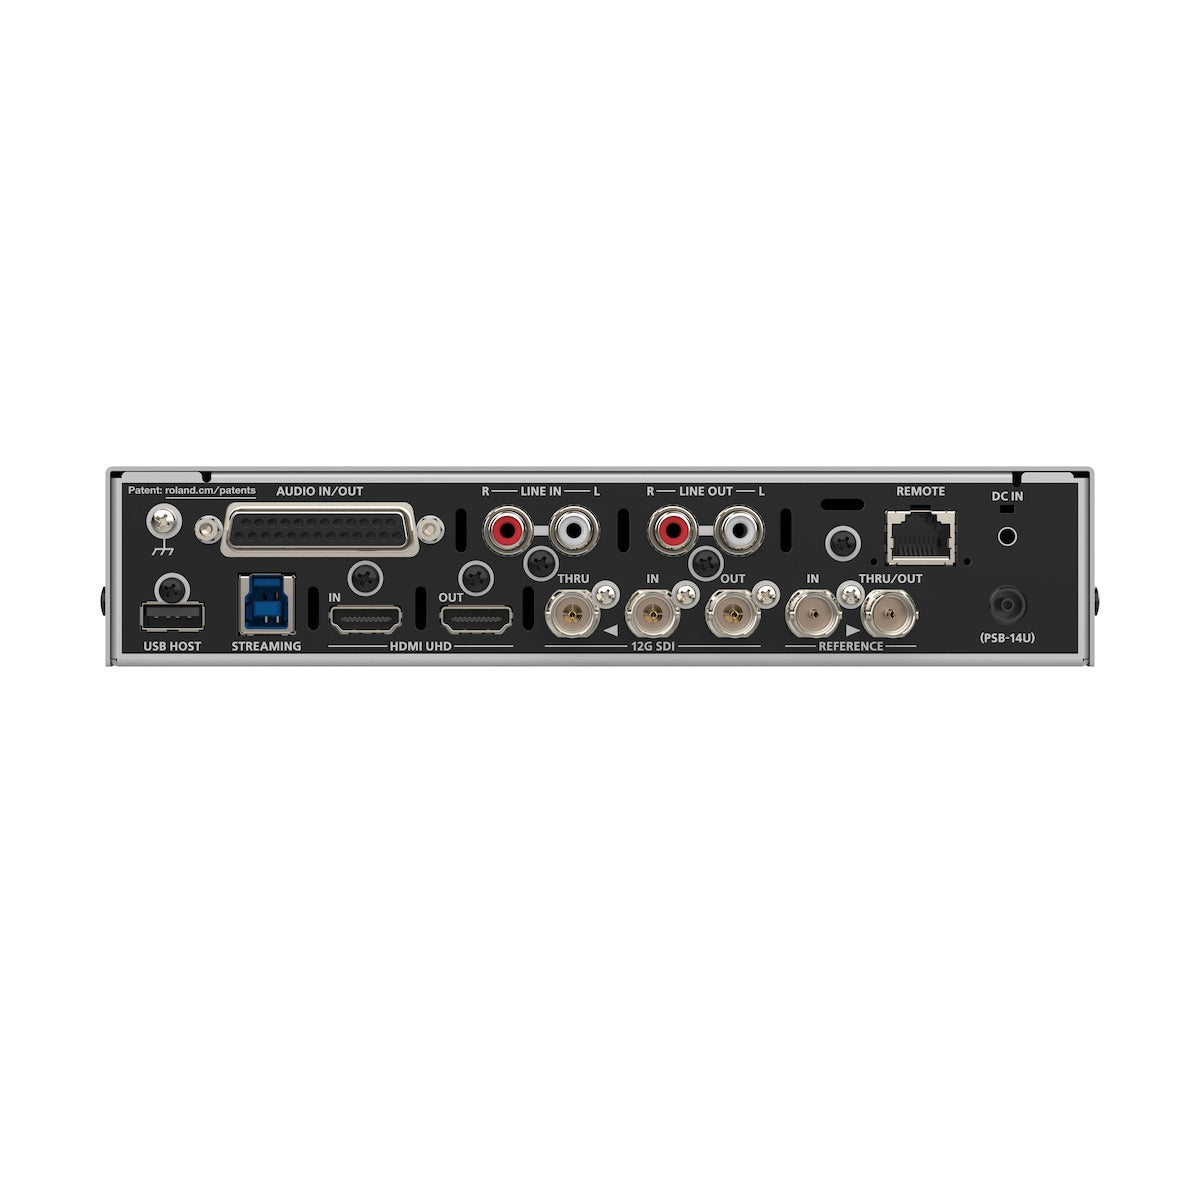 Roland VC-100UHD - 4K Video Scaler, Converter, and Streamer, rear